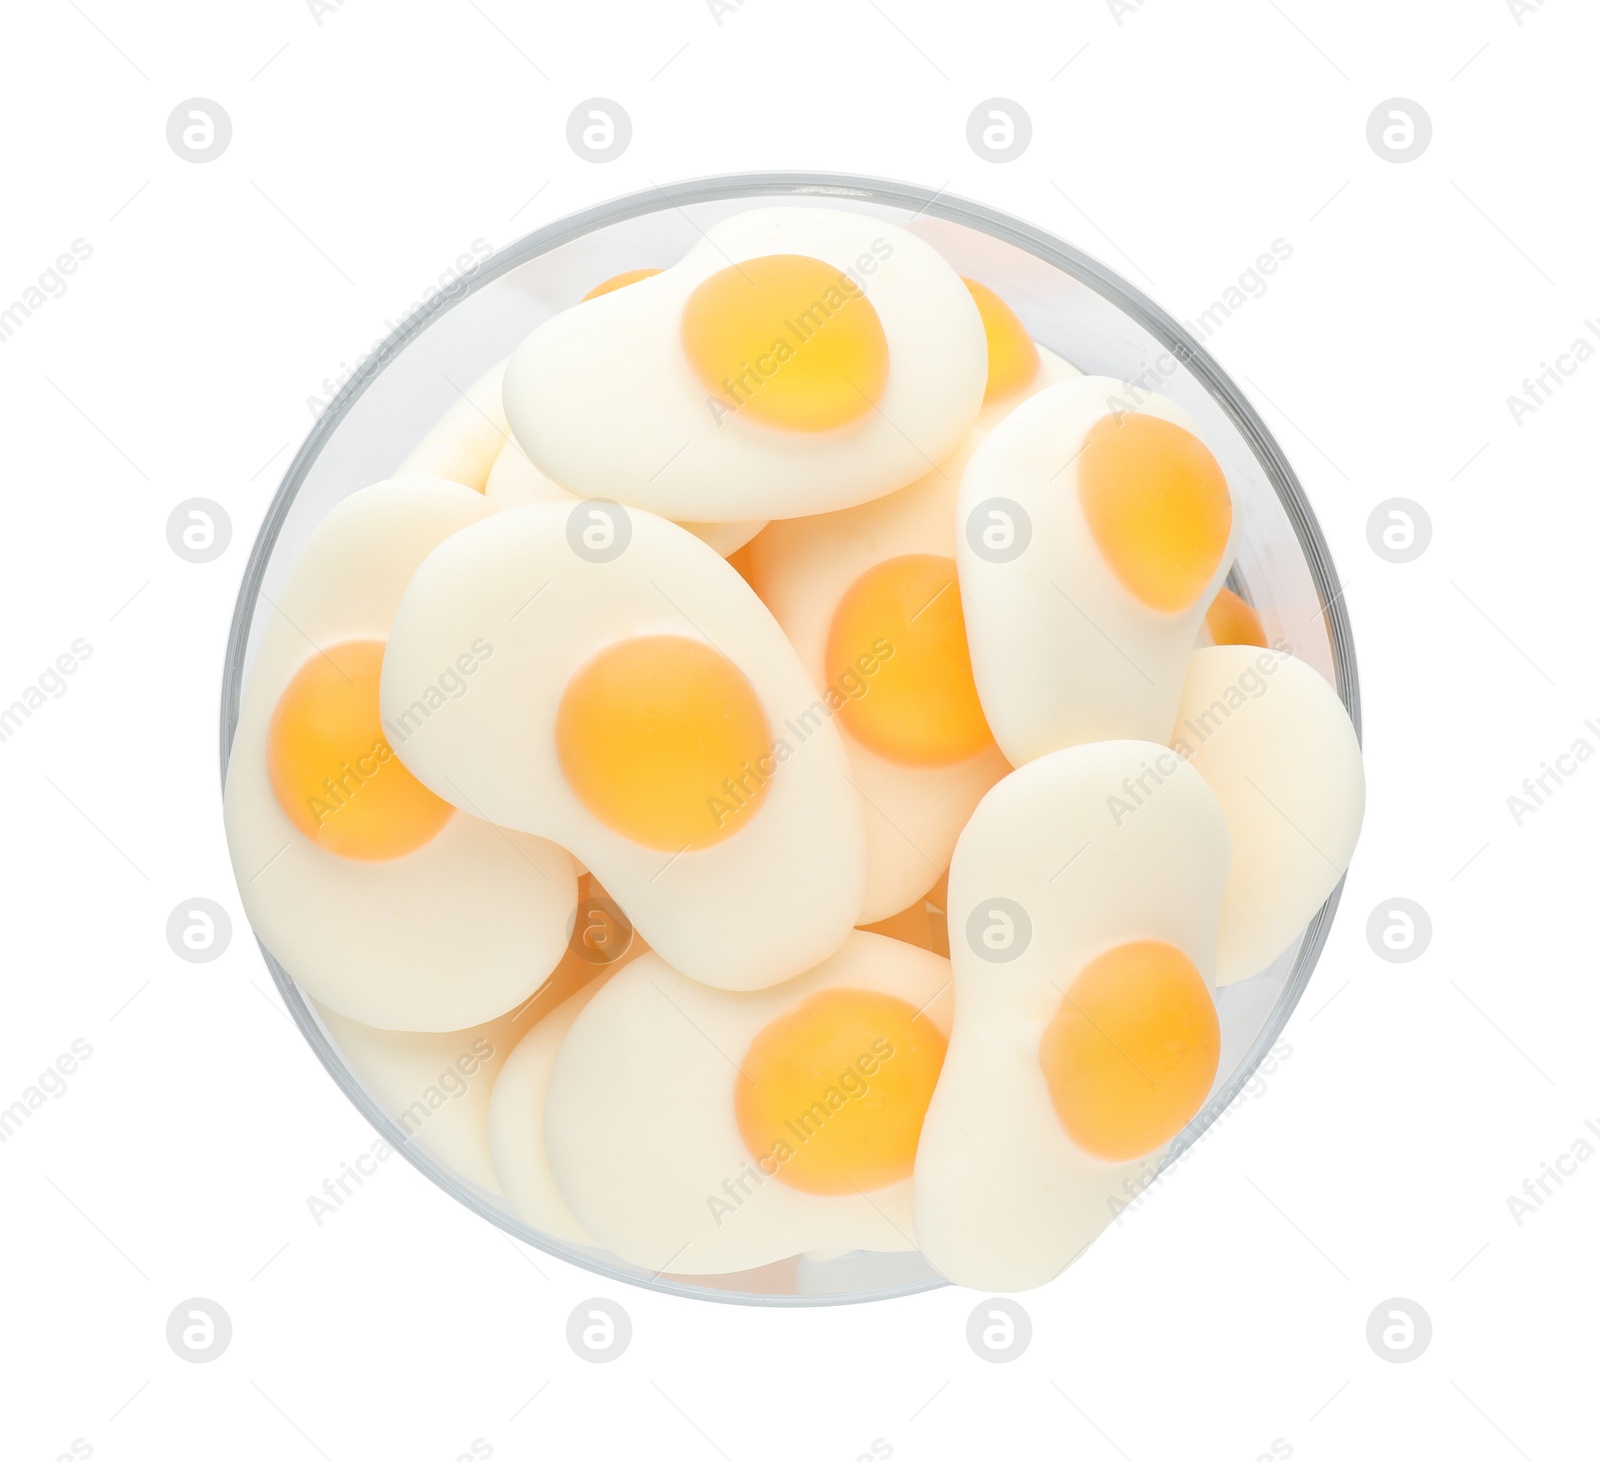 Photo of Bowl with tasty jelly candies in shape of egg on white background, top view